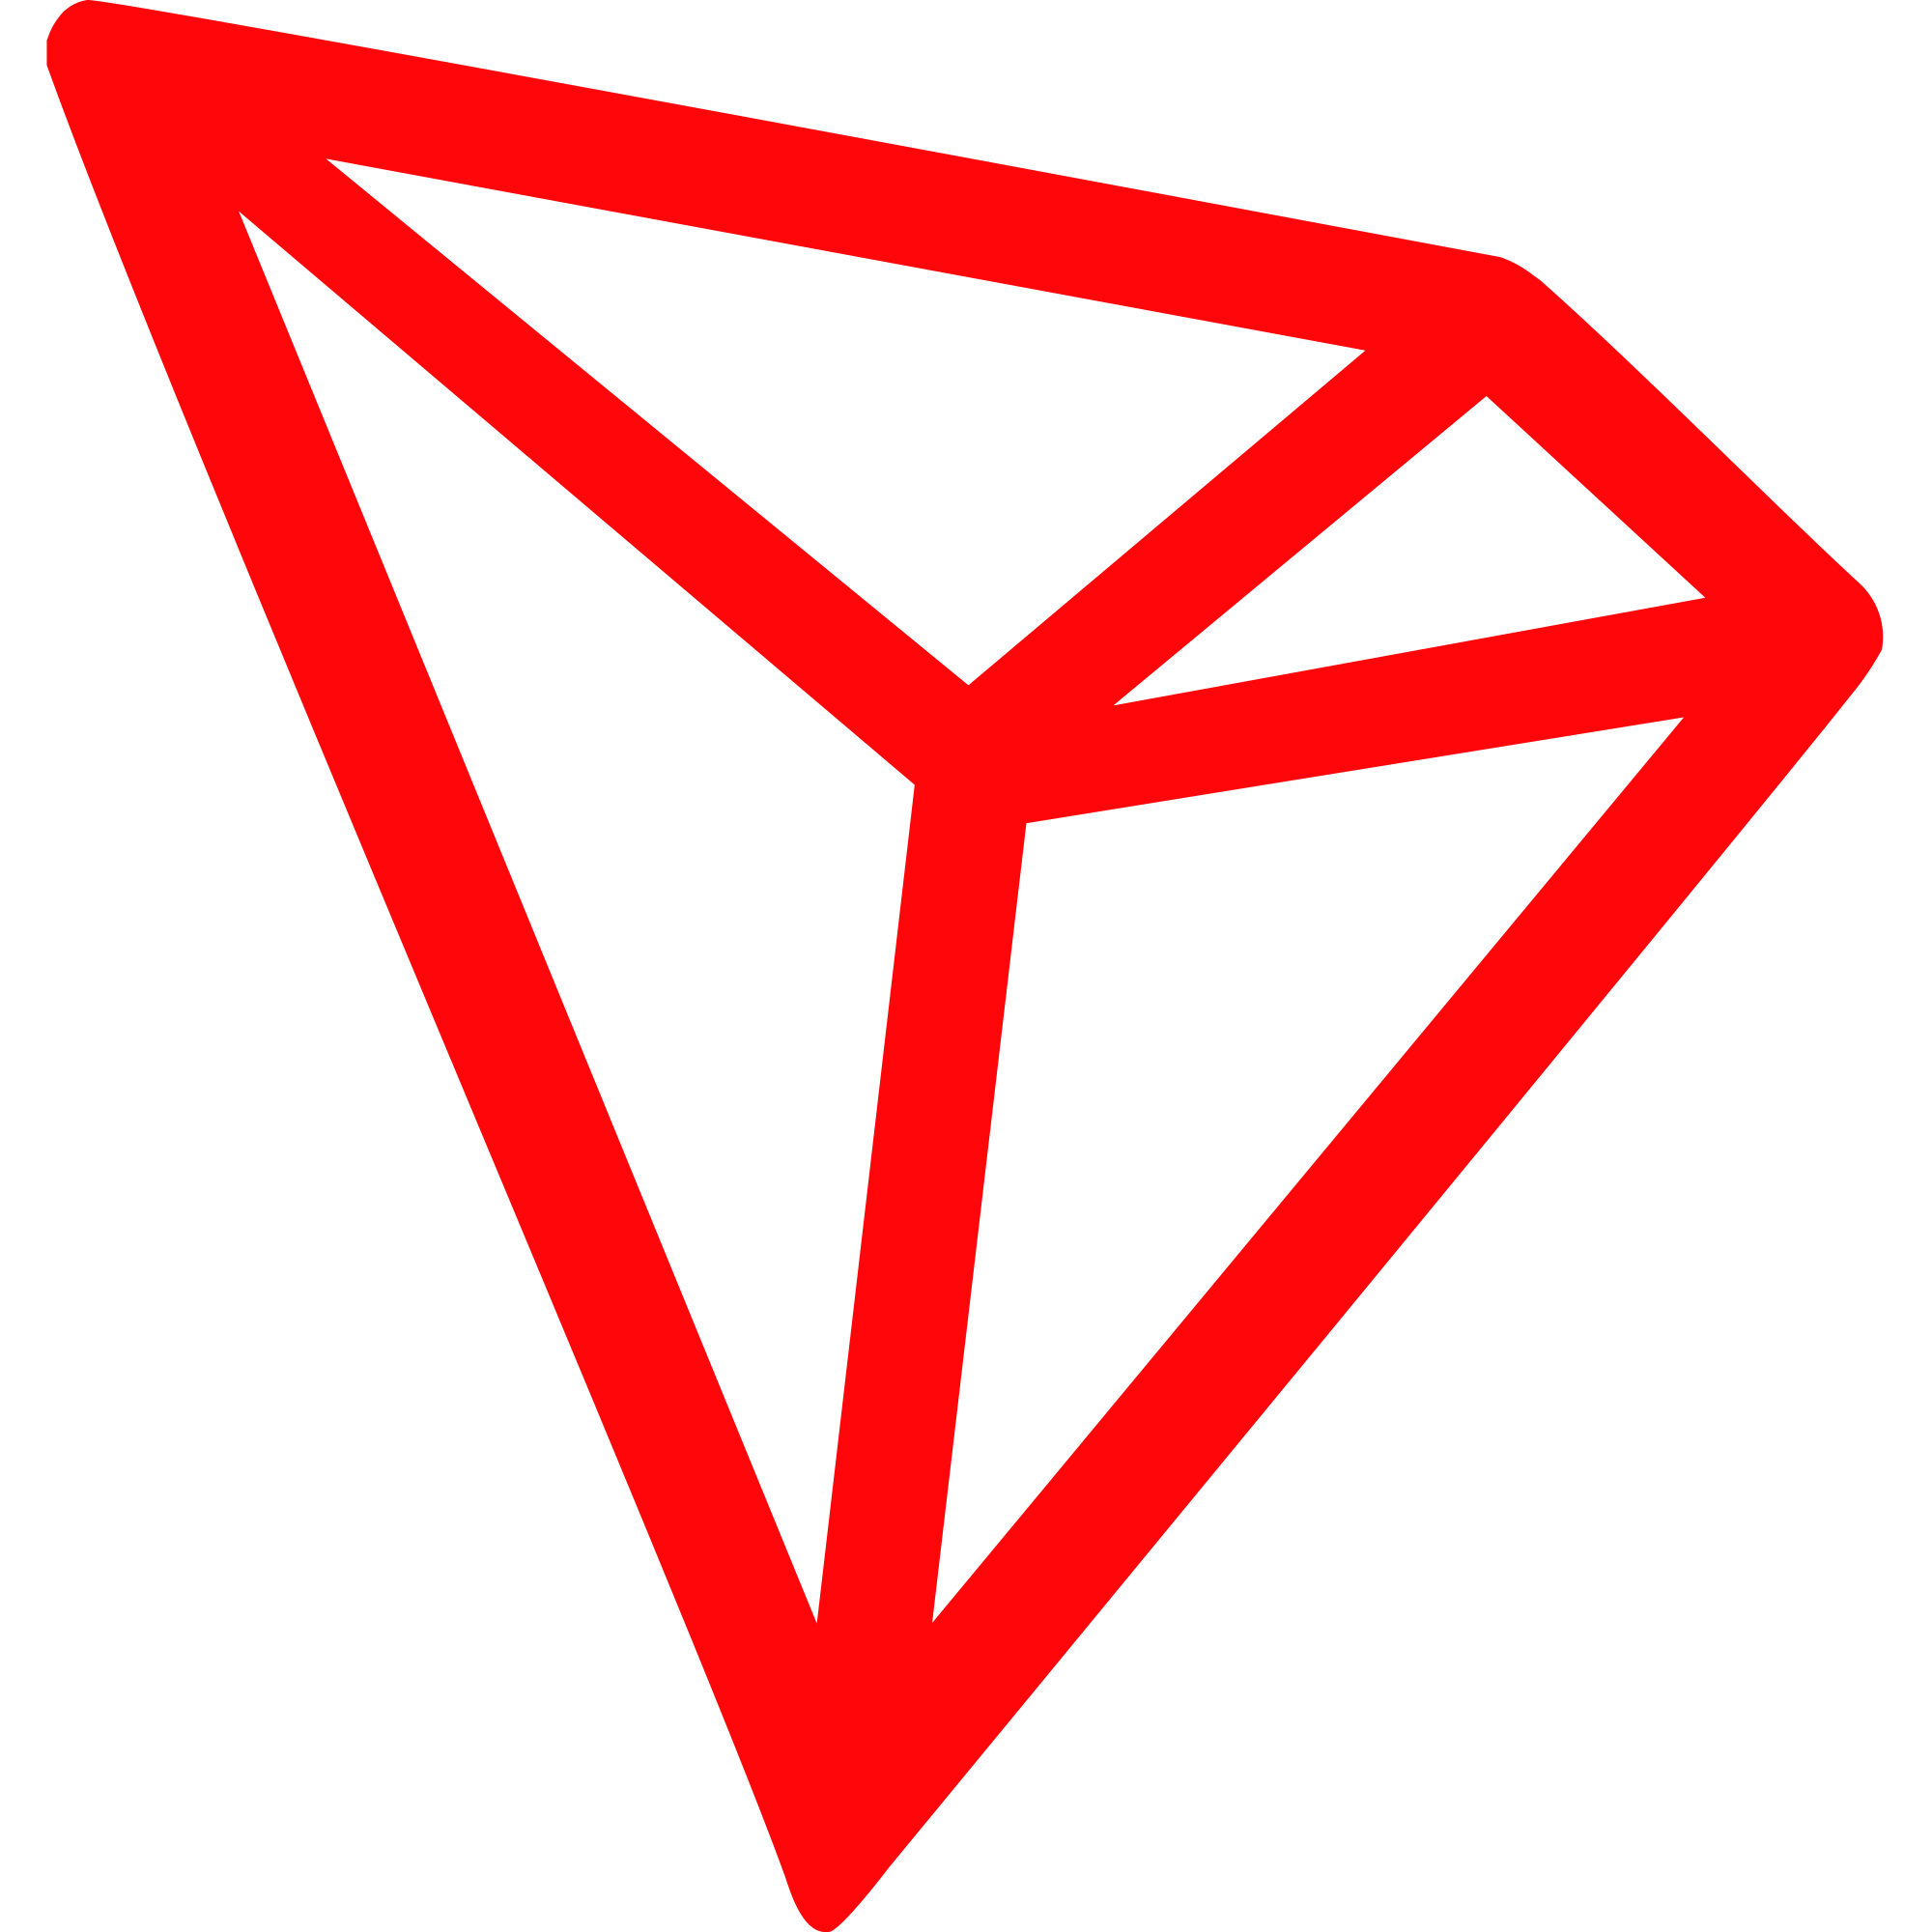 "TRON logo, representing blockchain technology expertise, symbolizing Techwink Services' proficiency in TRON blockchain solutions."